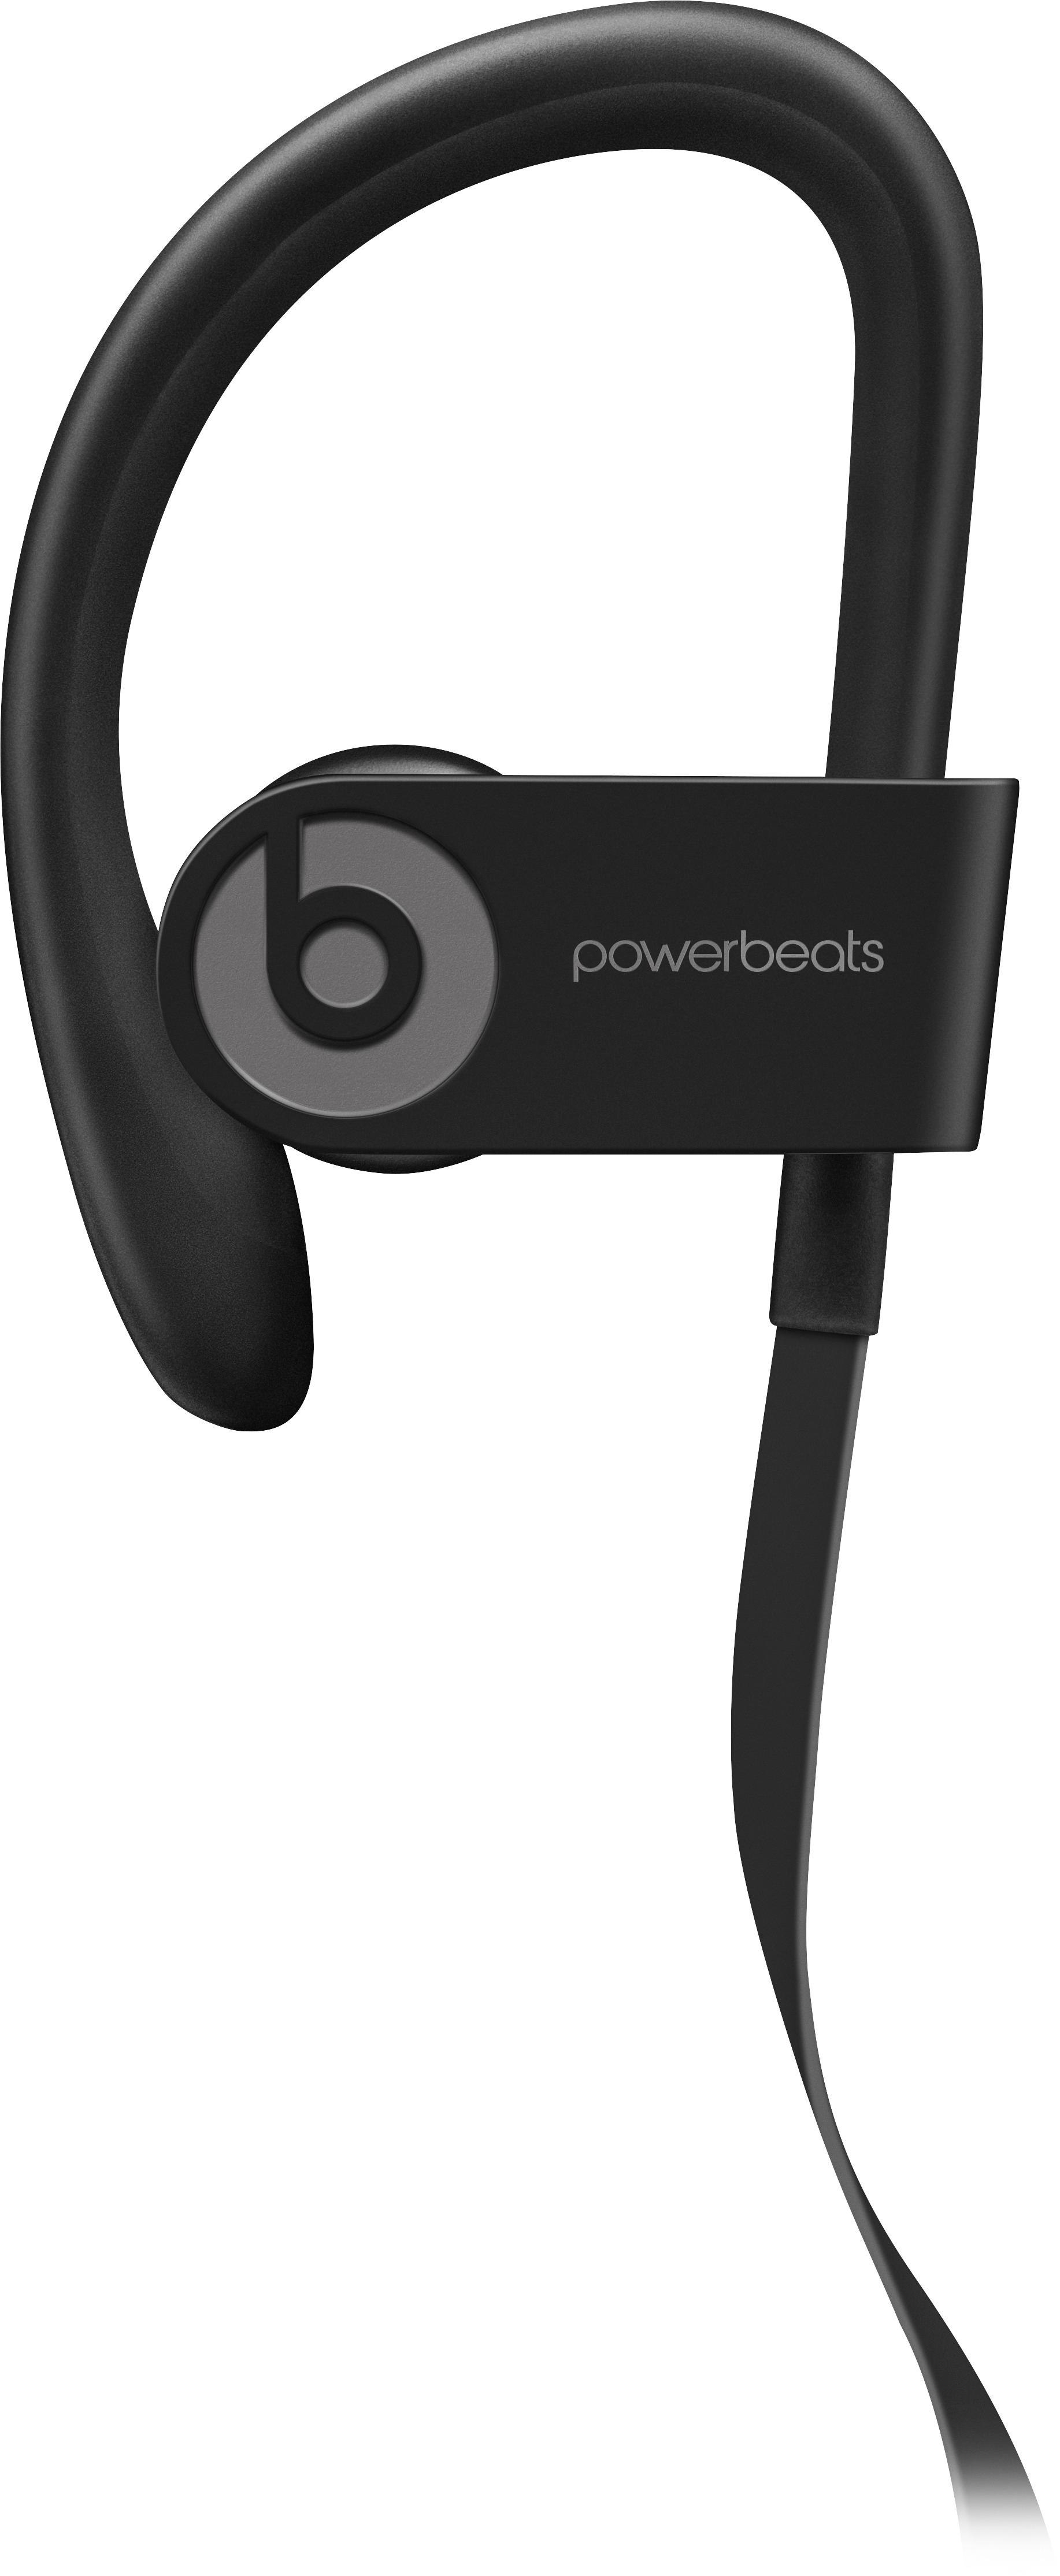 Angle View: Beats by Dr. Dre - Geek Squad Certified Refurbished Powerbeats³ Wireless - Black